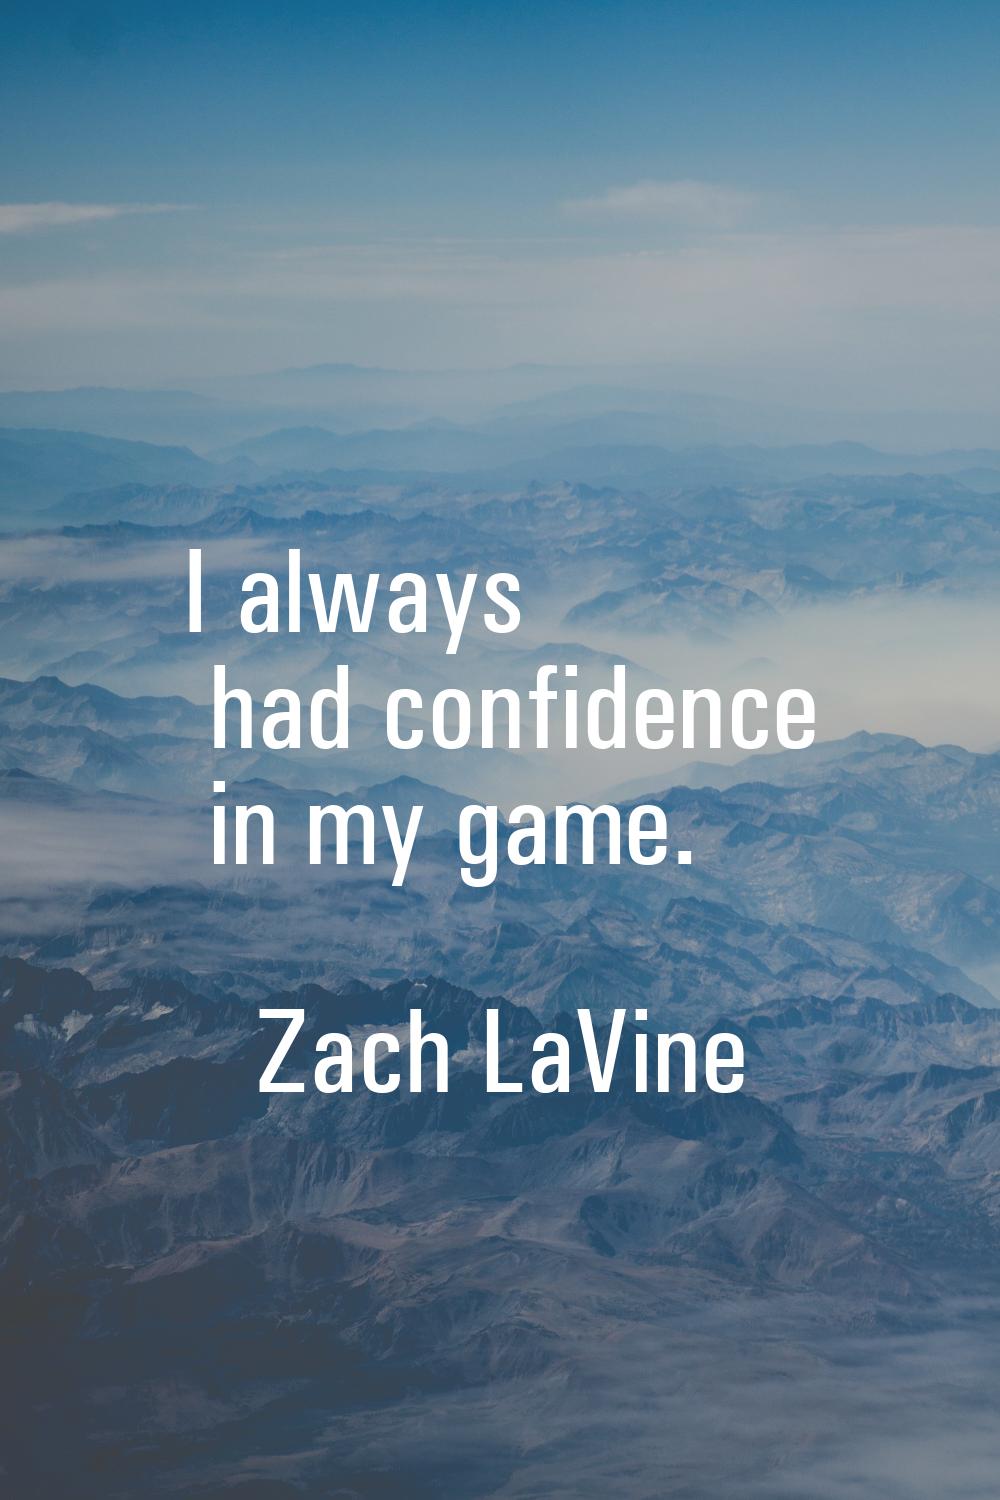 I always had confidence in my game.